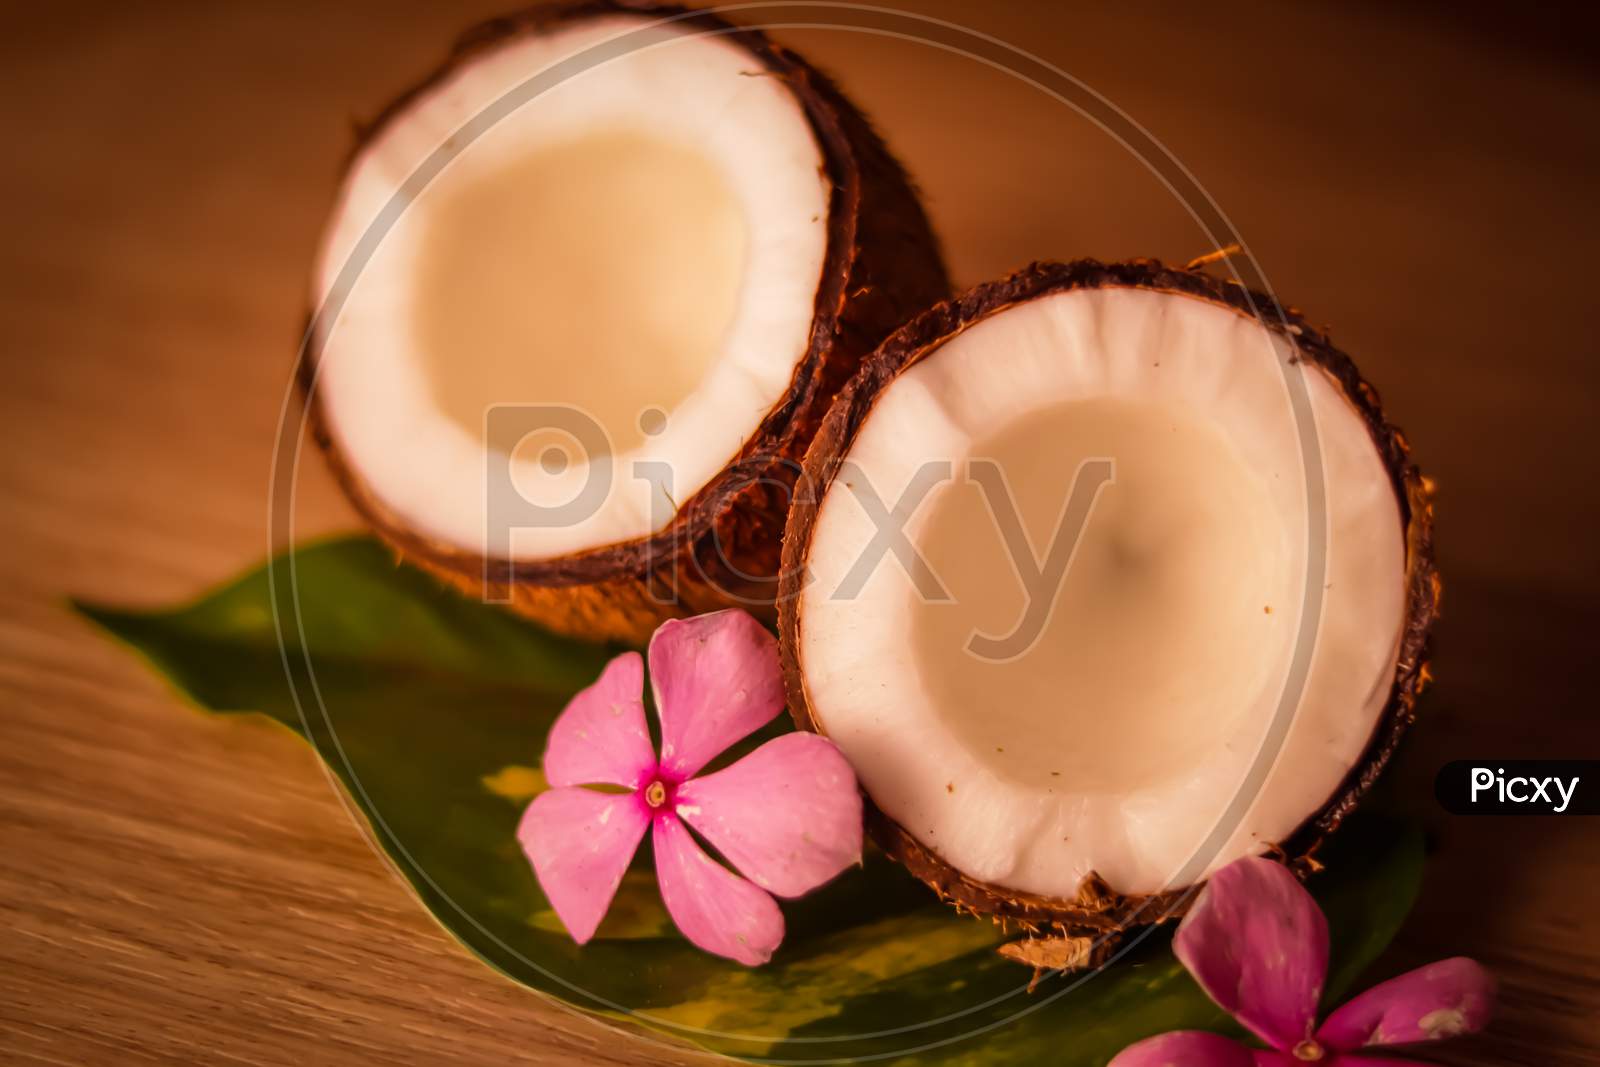 Coconut And Coconut Milk On Wooden Table,Coconut With Leaves And Flower,Glasses Of Coconut Milk,,Selective Focus On Subject,